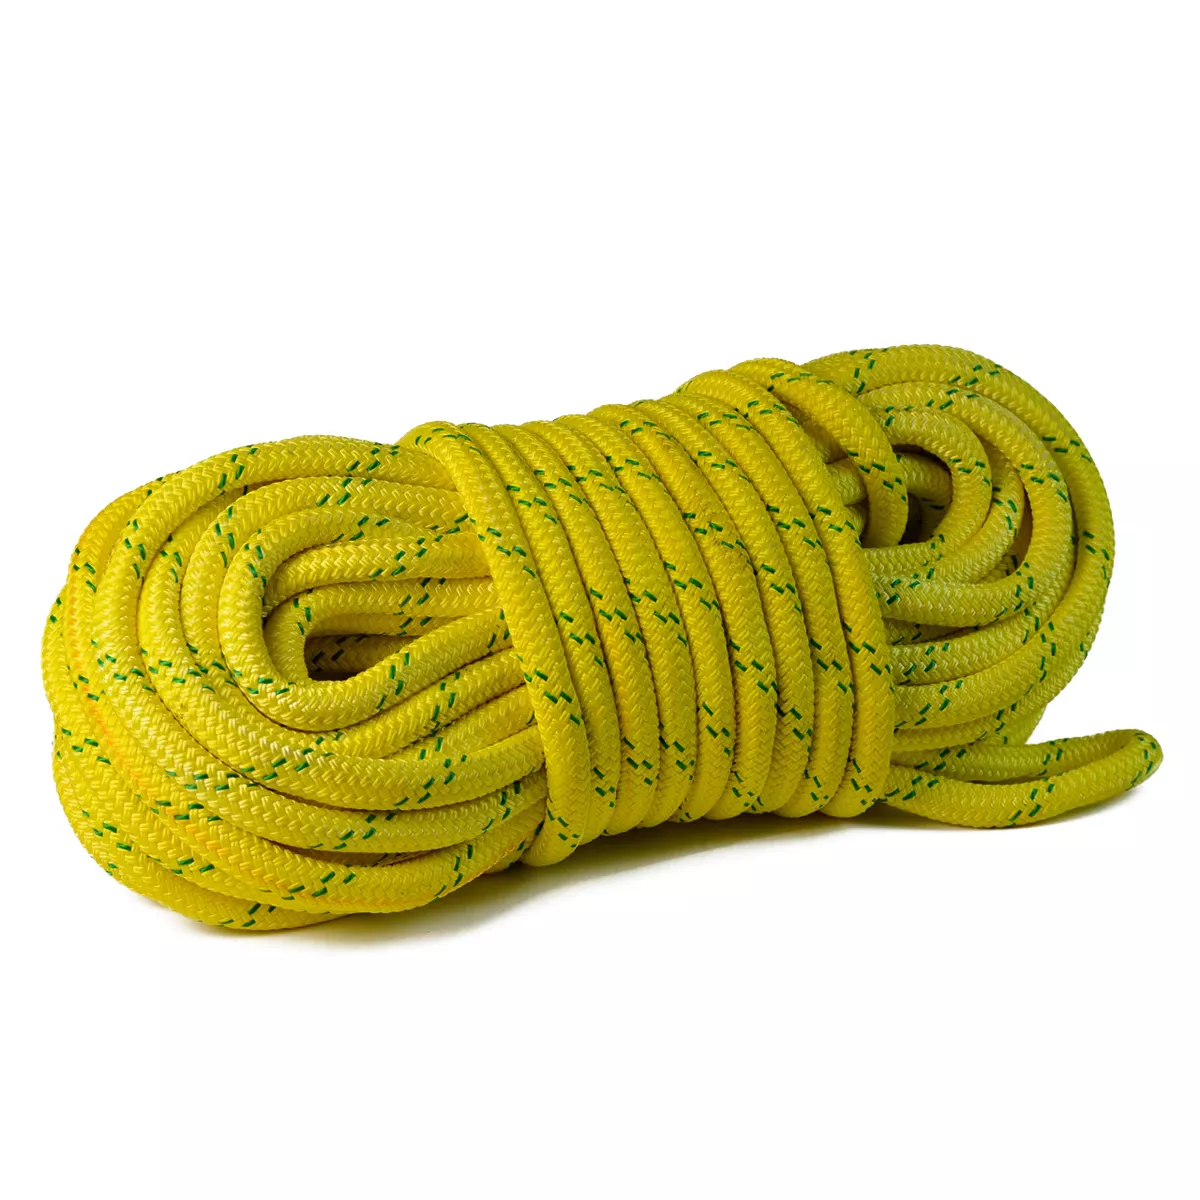 Buy 3/4 - Matador™ Bull Rope  Rigging Rope for Arborists online from  $237.60